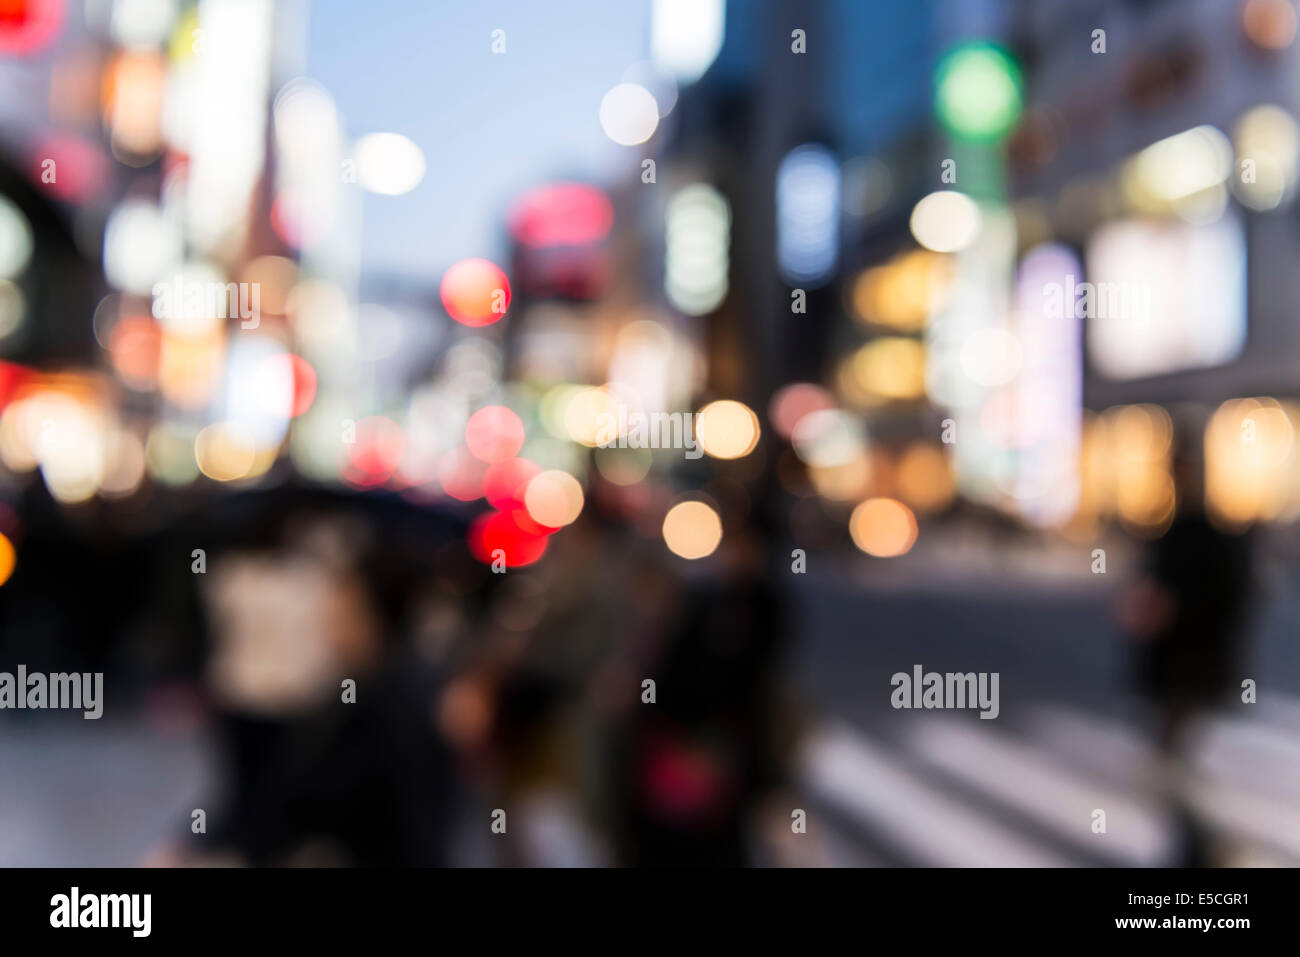 Abstract out-of-focus city scenery with colorful lights. Tokyo, Japan. Stock Photo